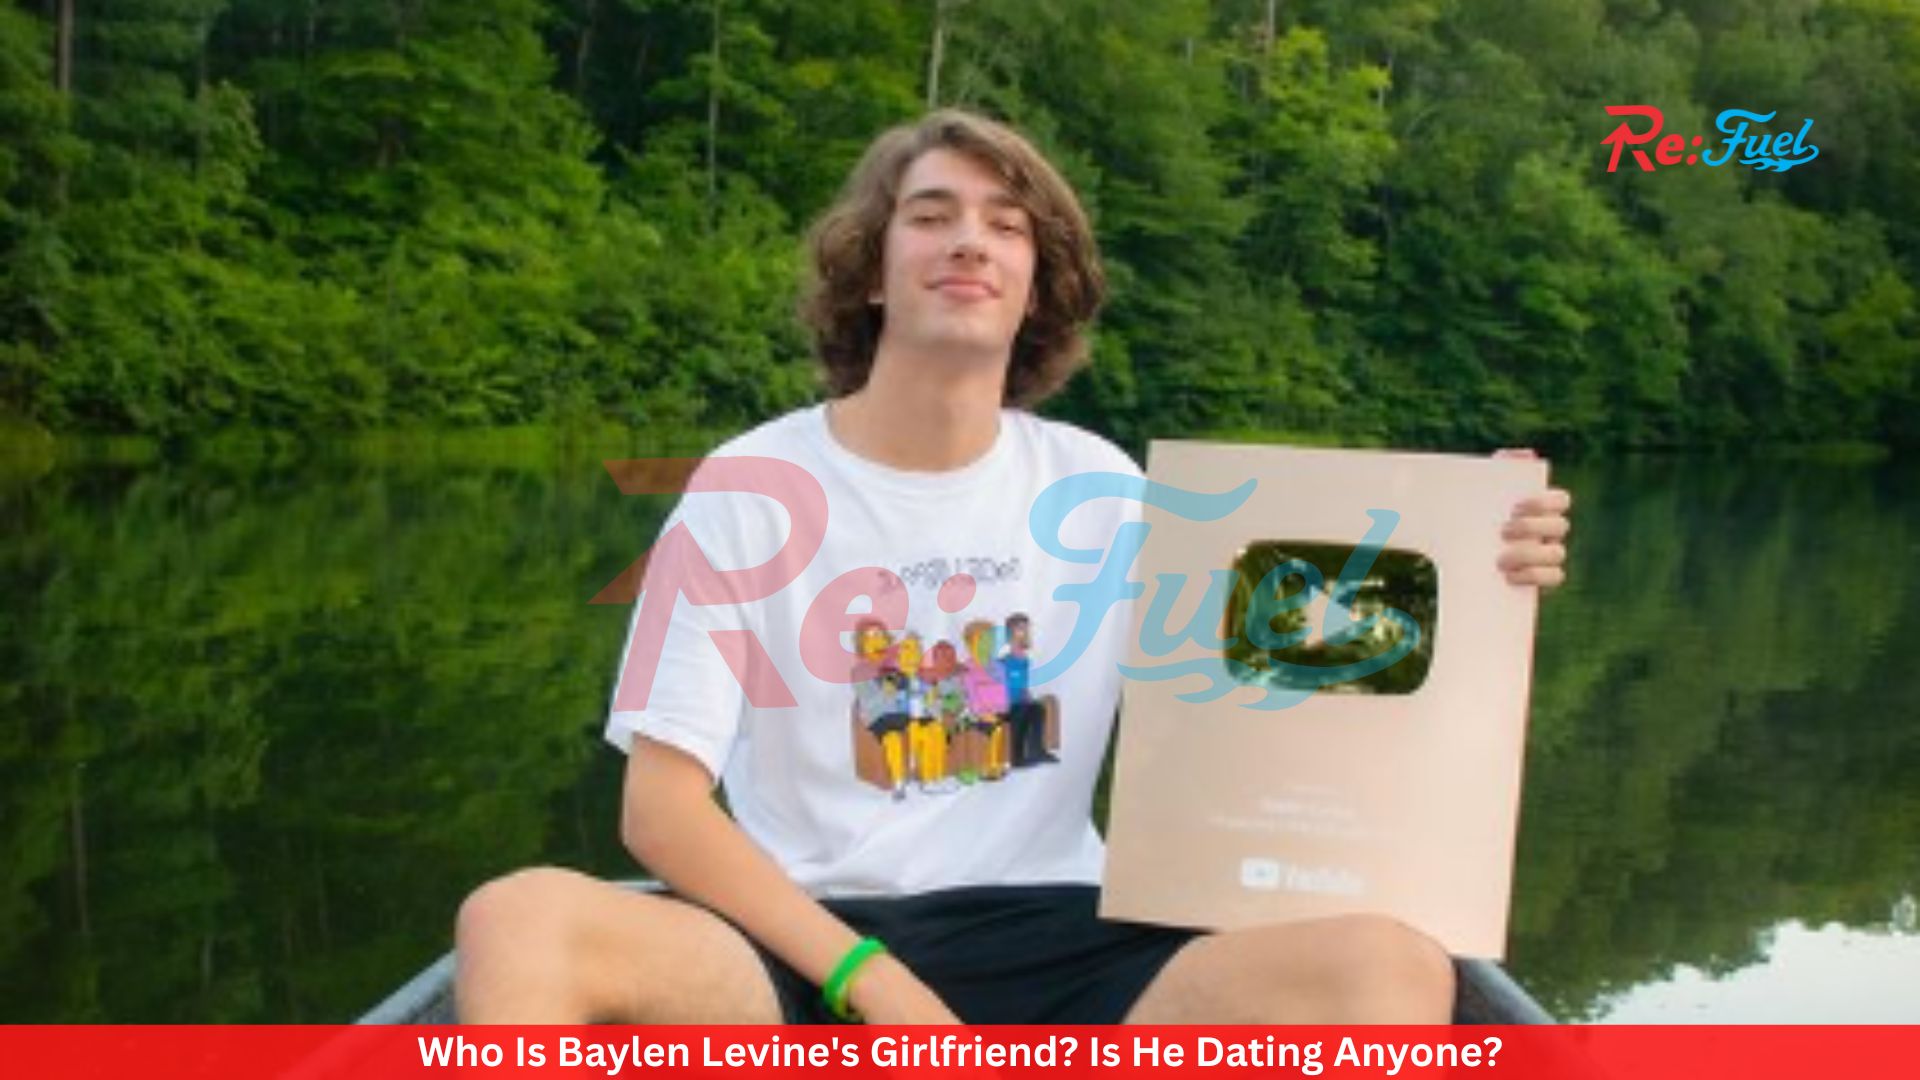 Who Is Baylen Levine's Girlfriend? Is He Dating Anyone?